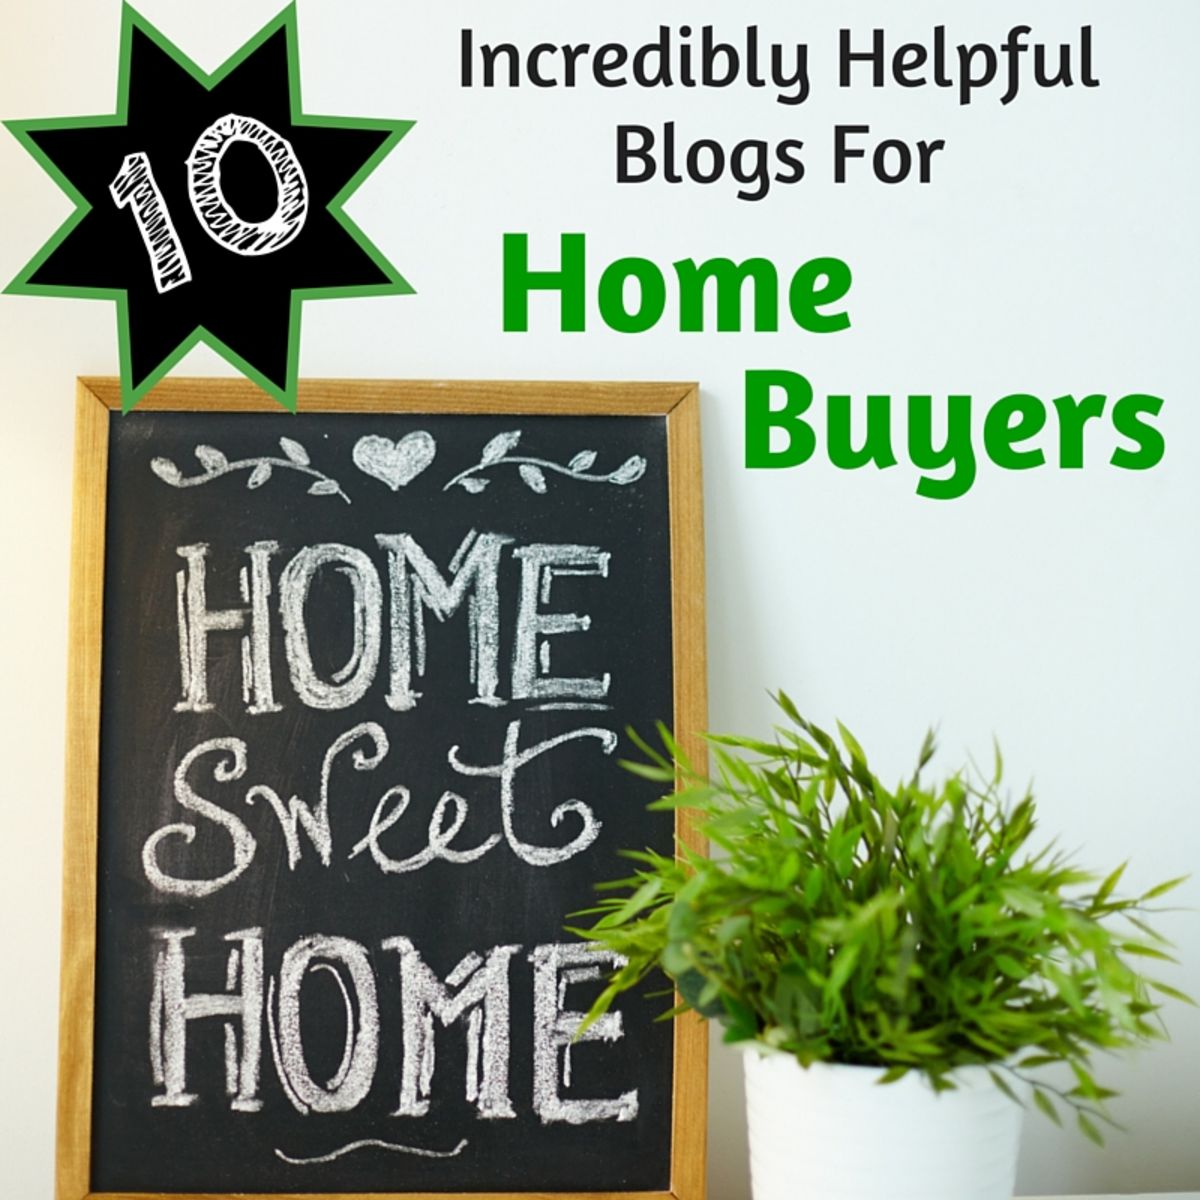 Headline for 10 Incredibly Helpful Blogs For Home Buyers